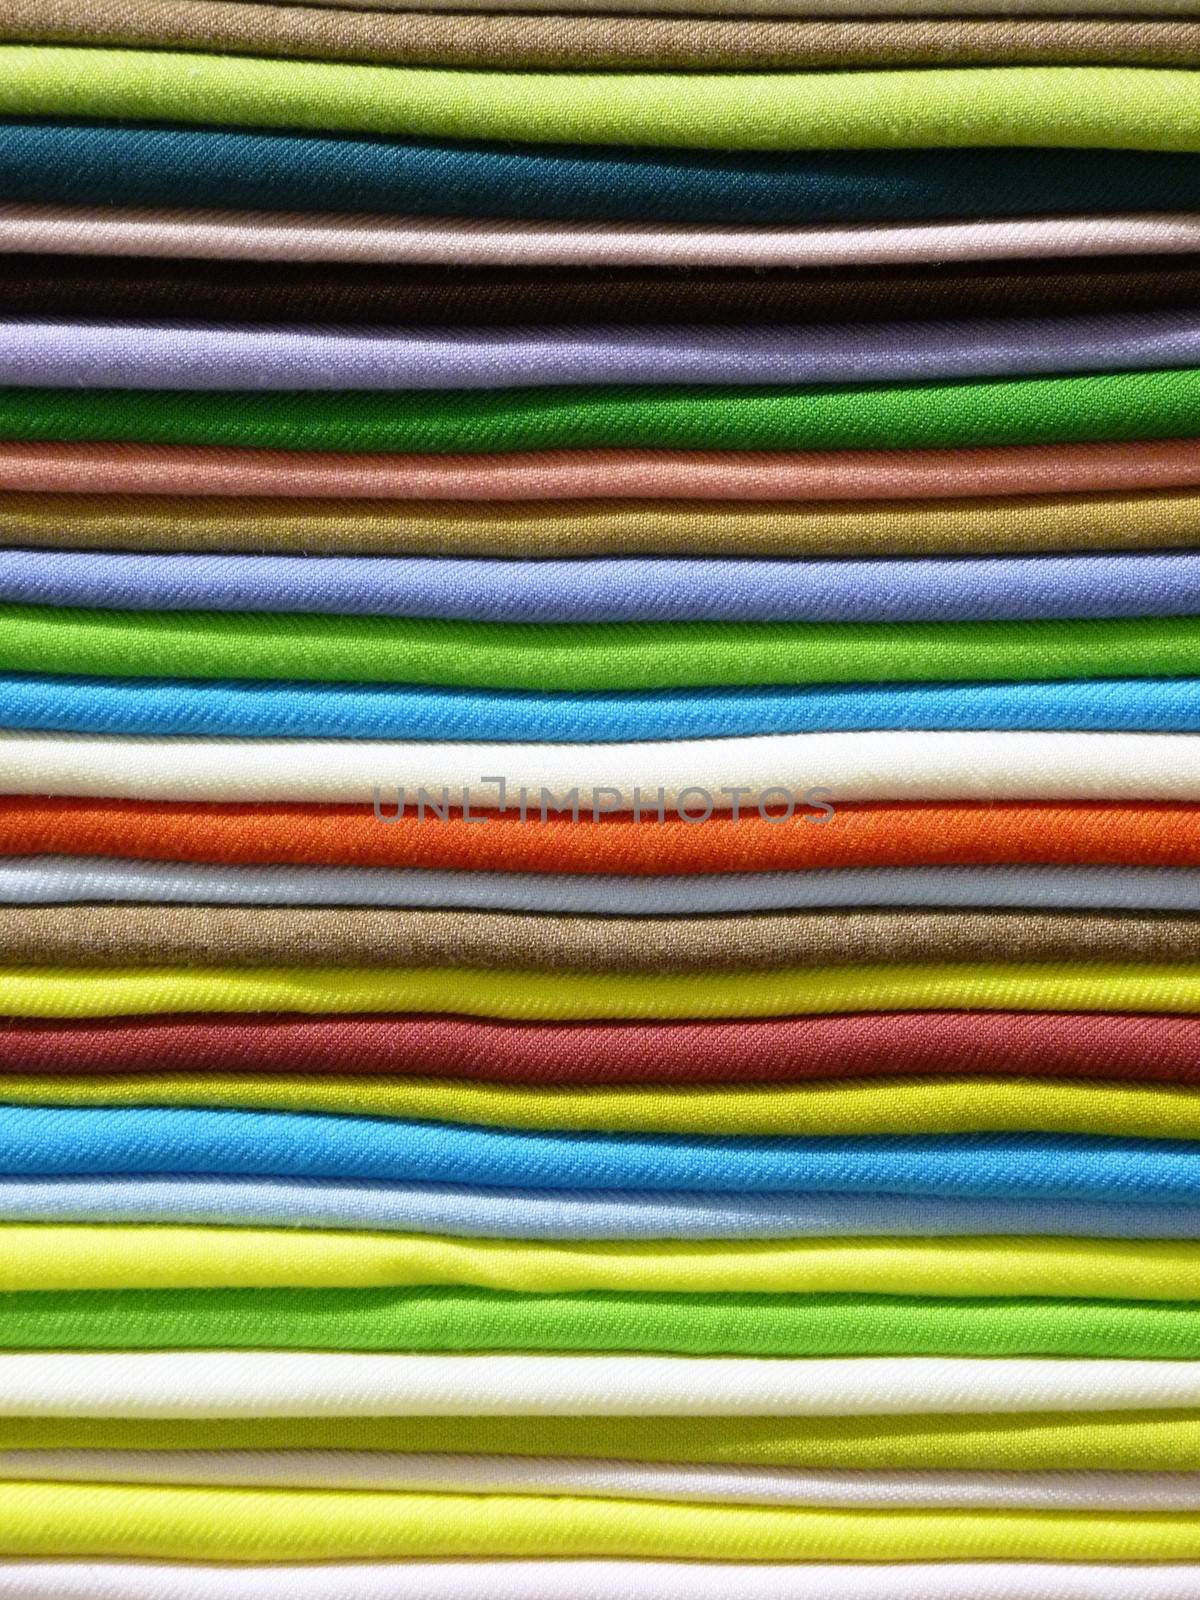 Stacked on top of colored fabrics